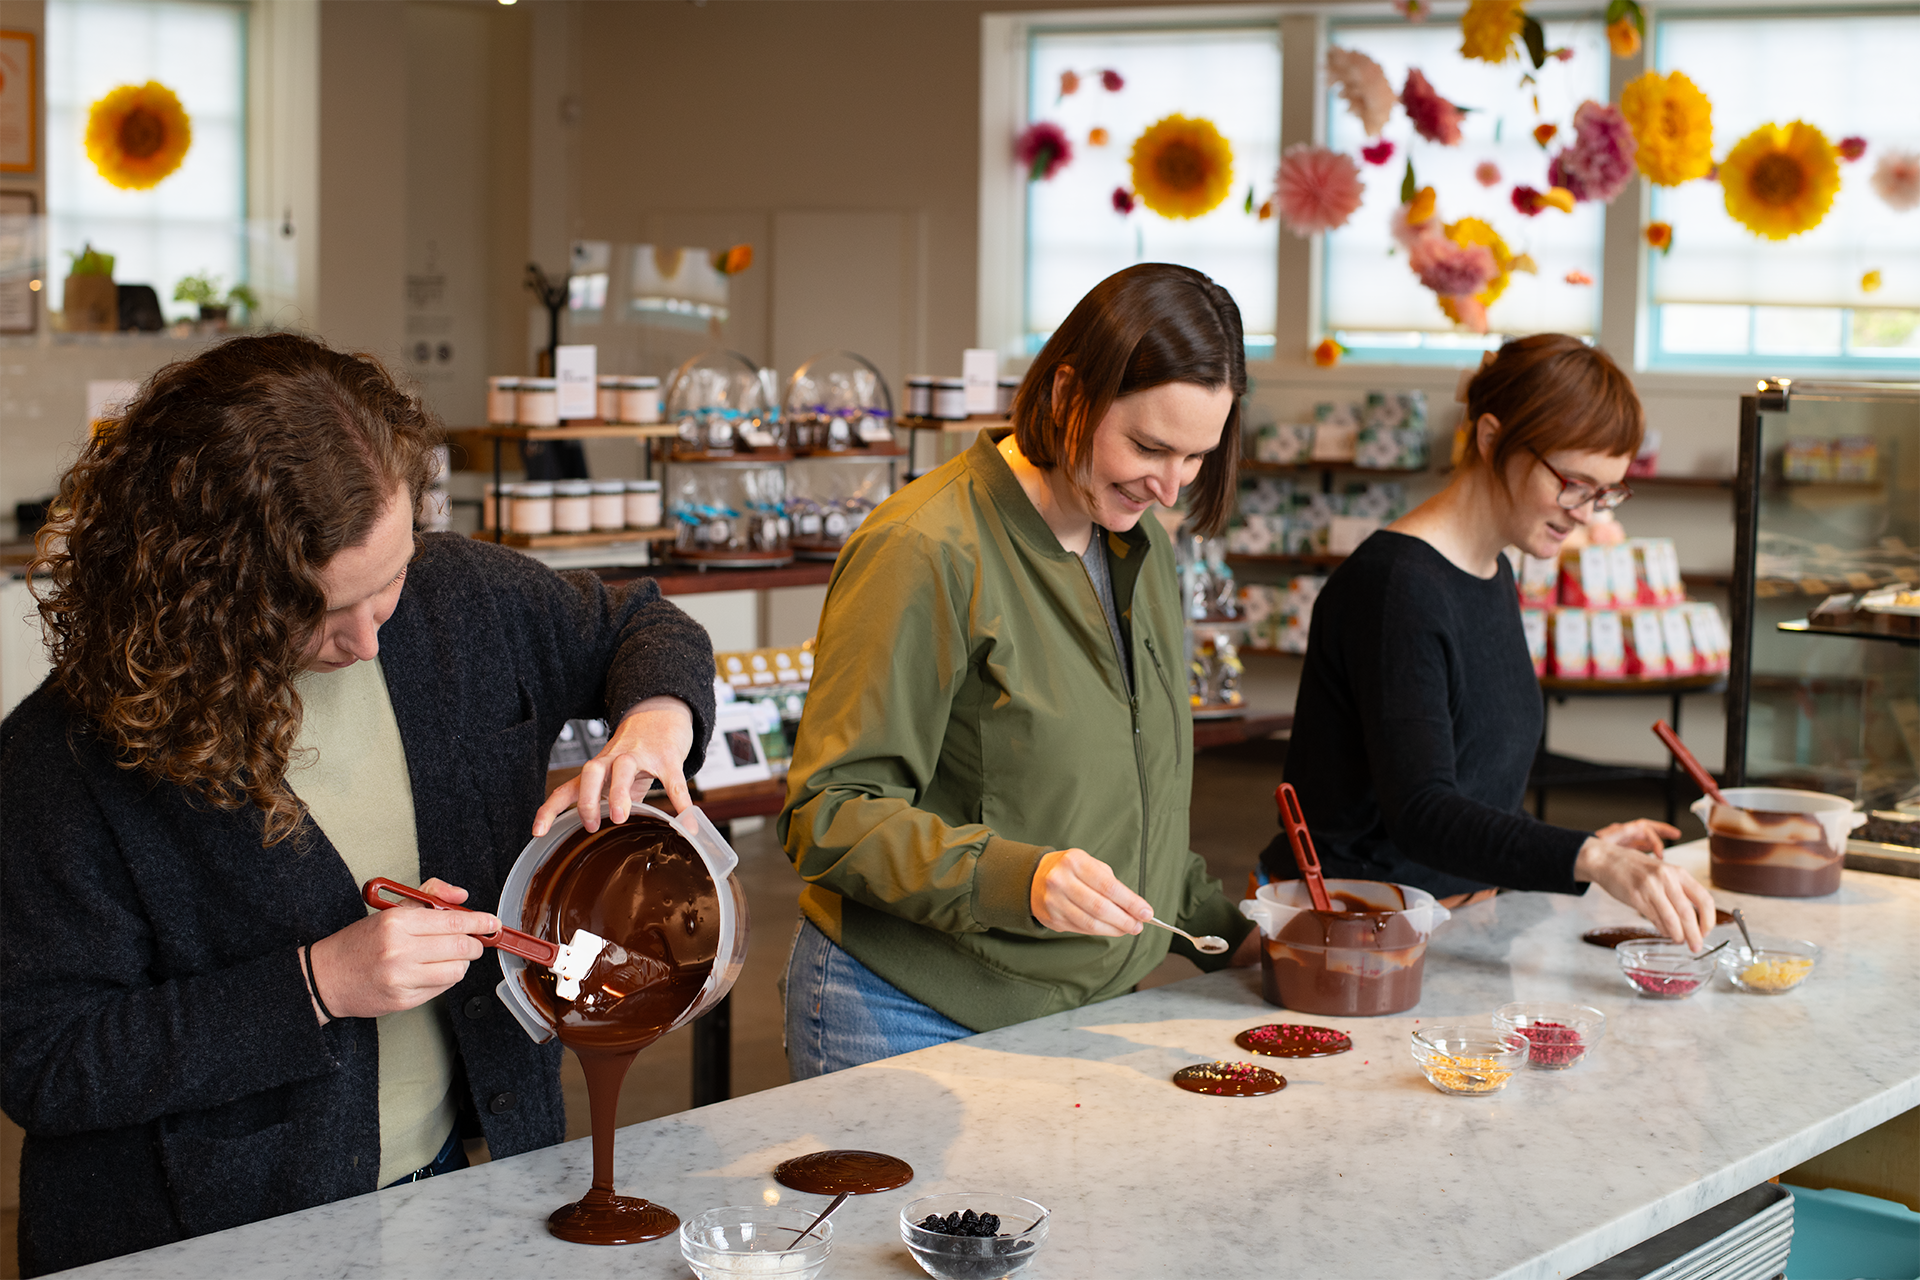 People pouring chocolate during an in-person class.